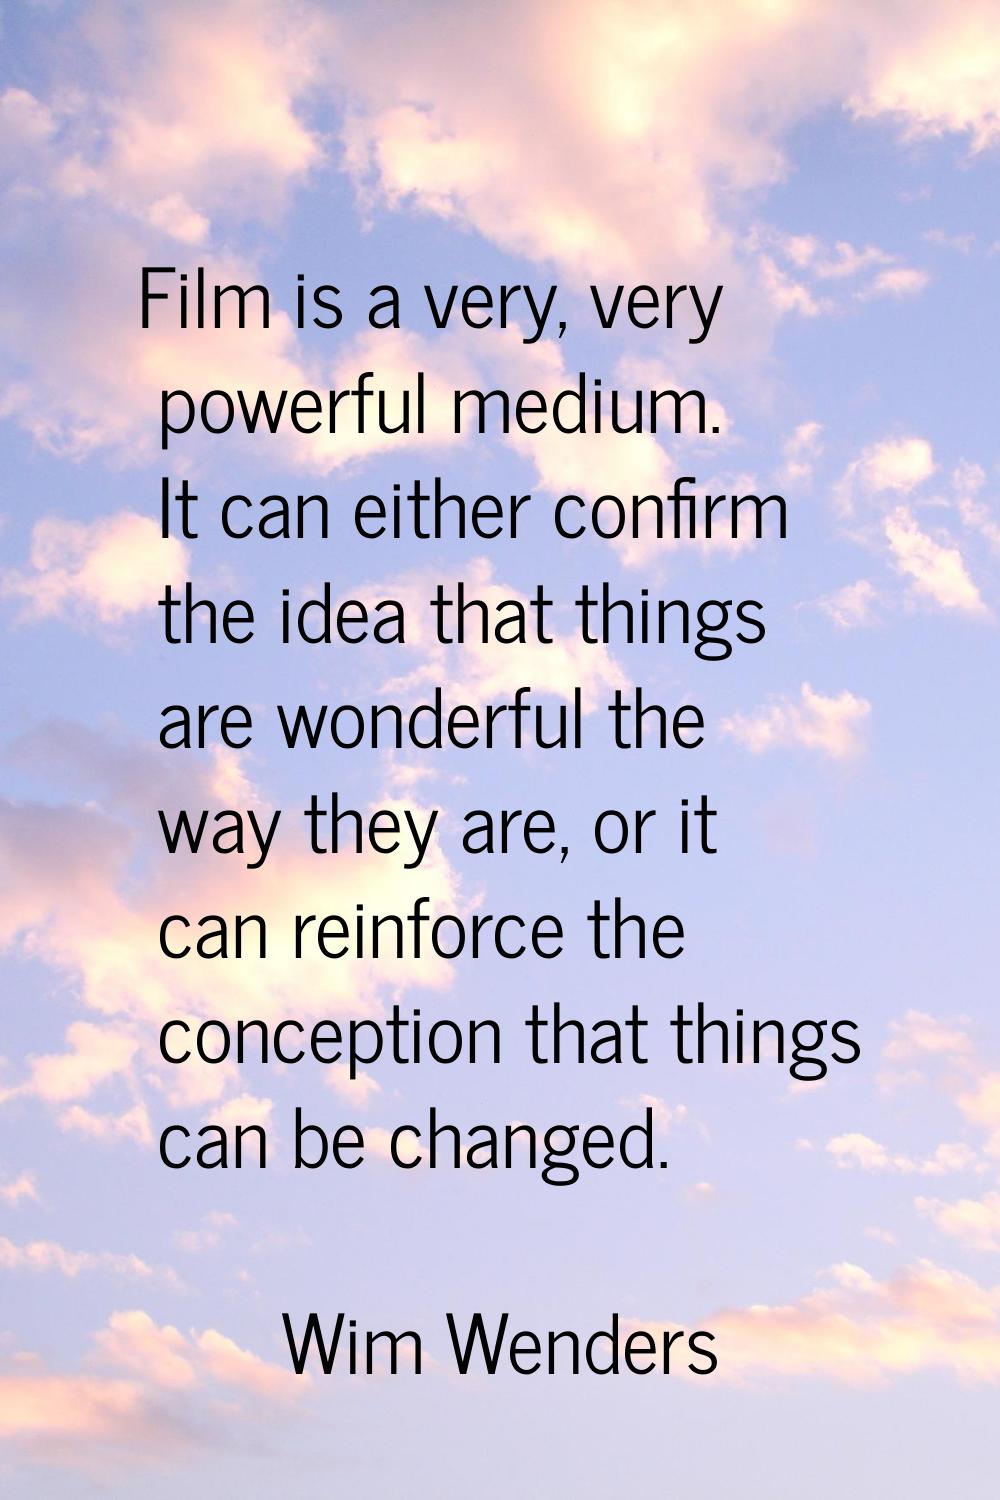 Film is a very, very powerful medium. It can either confirm the idea that things are wonderful the 